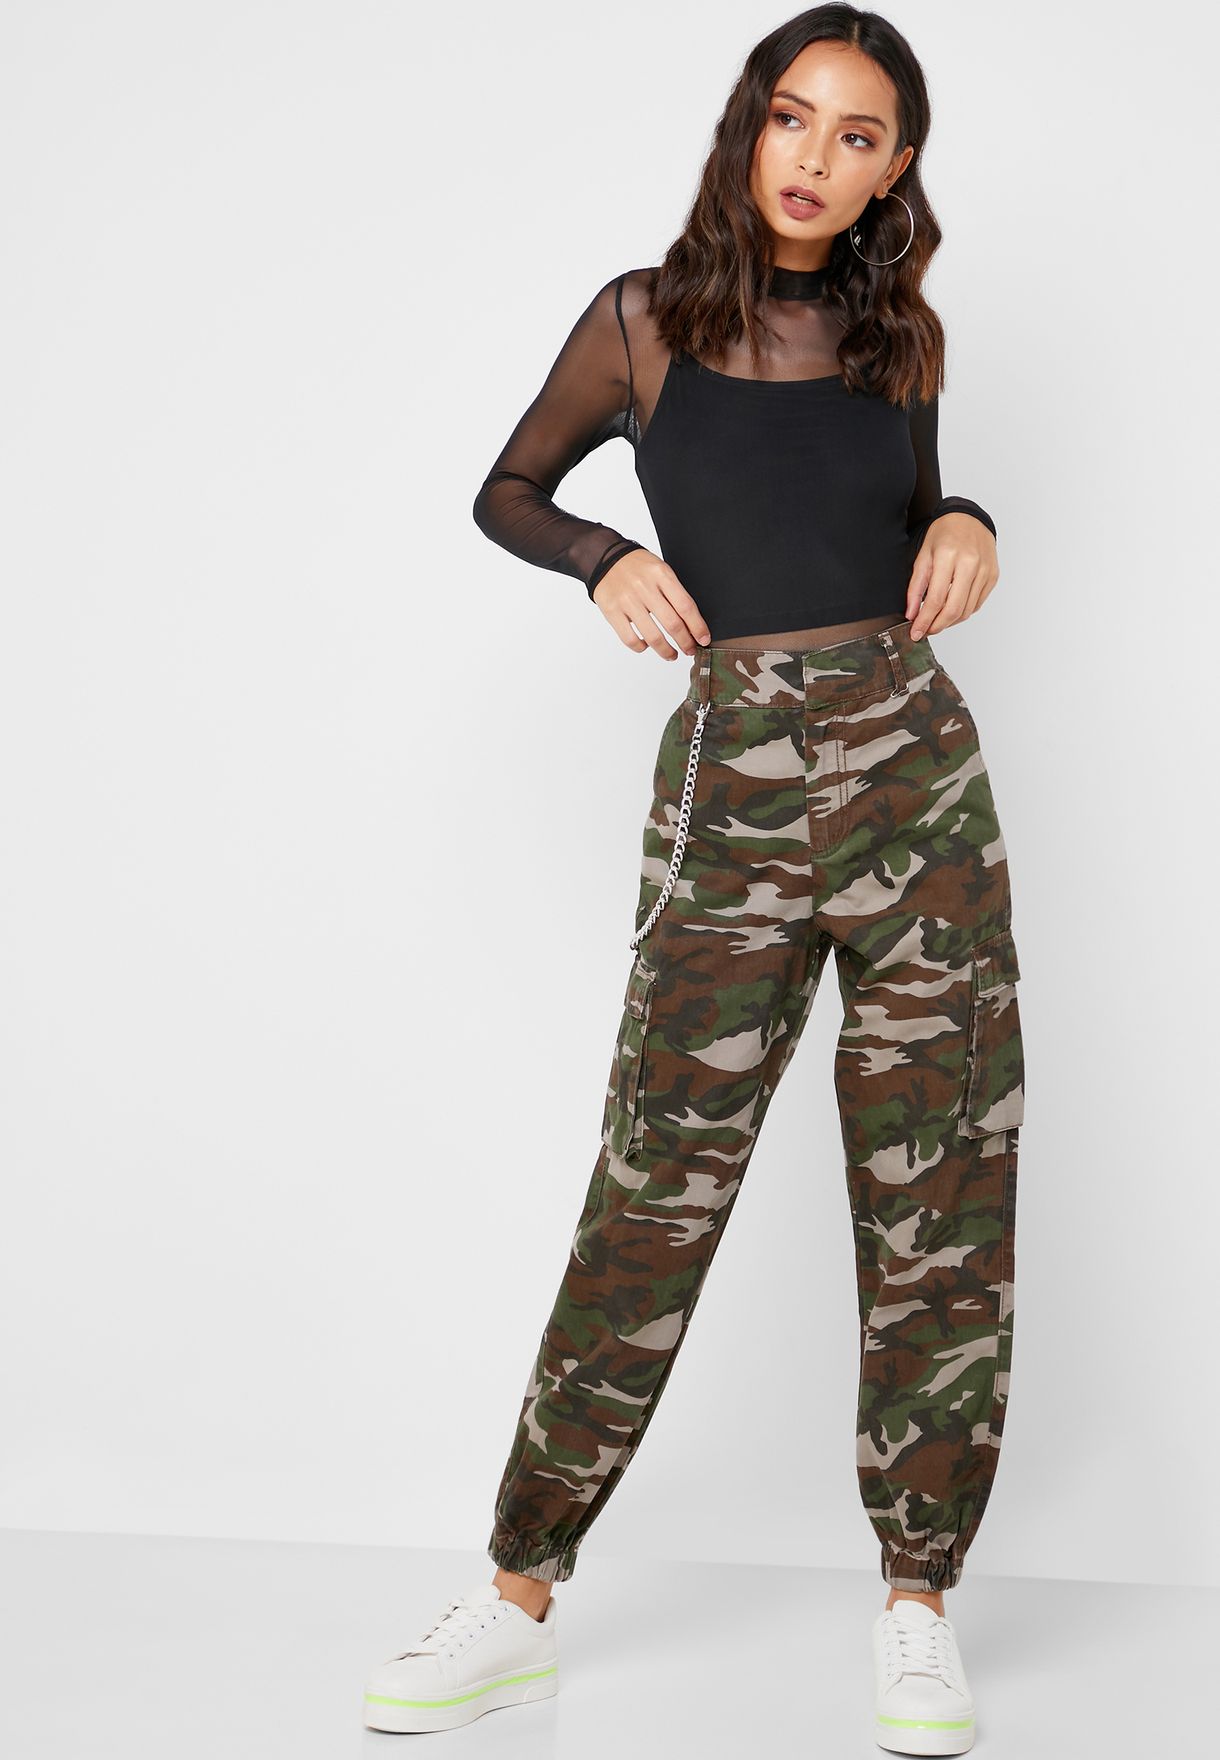 camouflage cargo pants forever 21